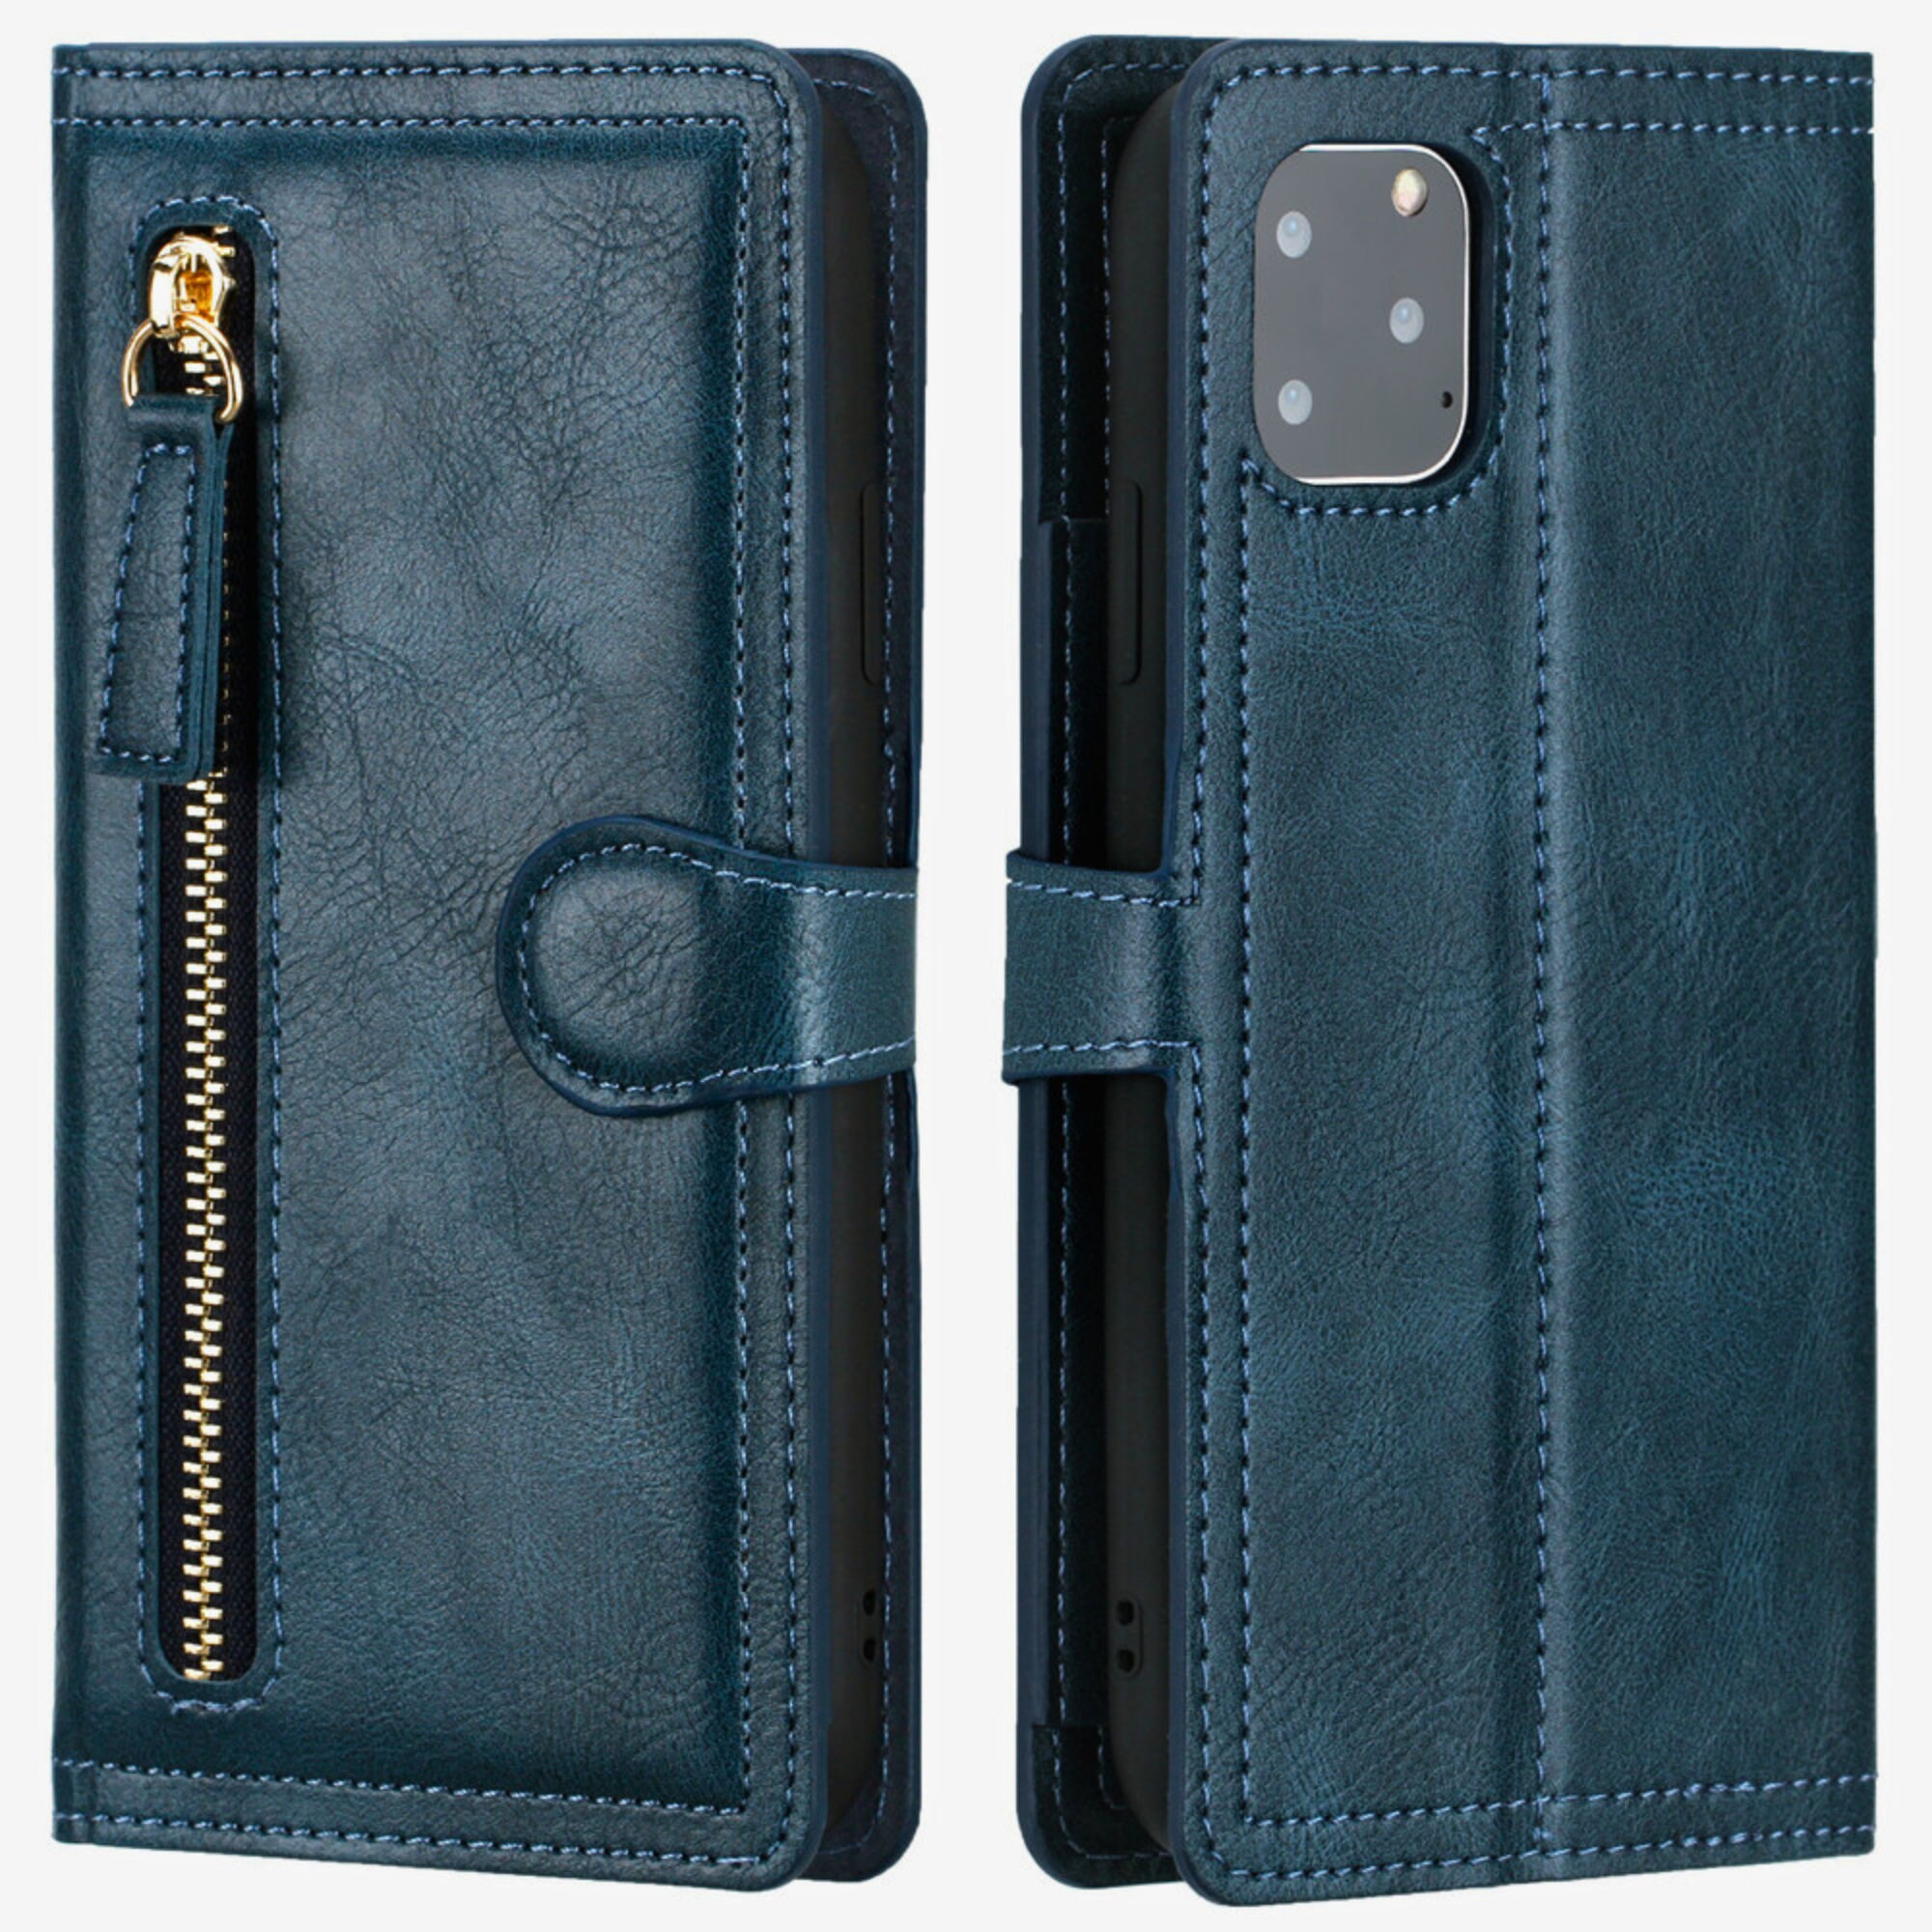 Leather iPhone Wallet Case, Zipper Flip Case Stand Cover With Card ...